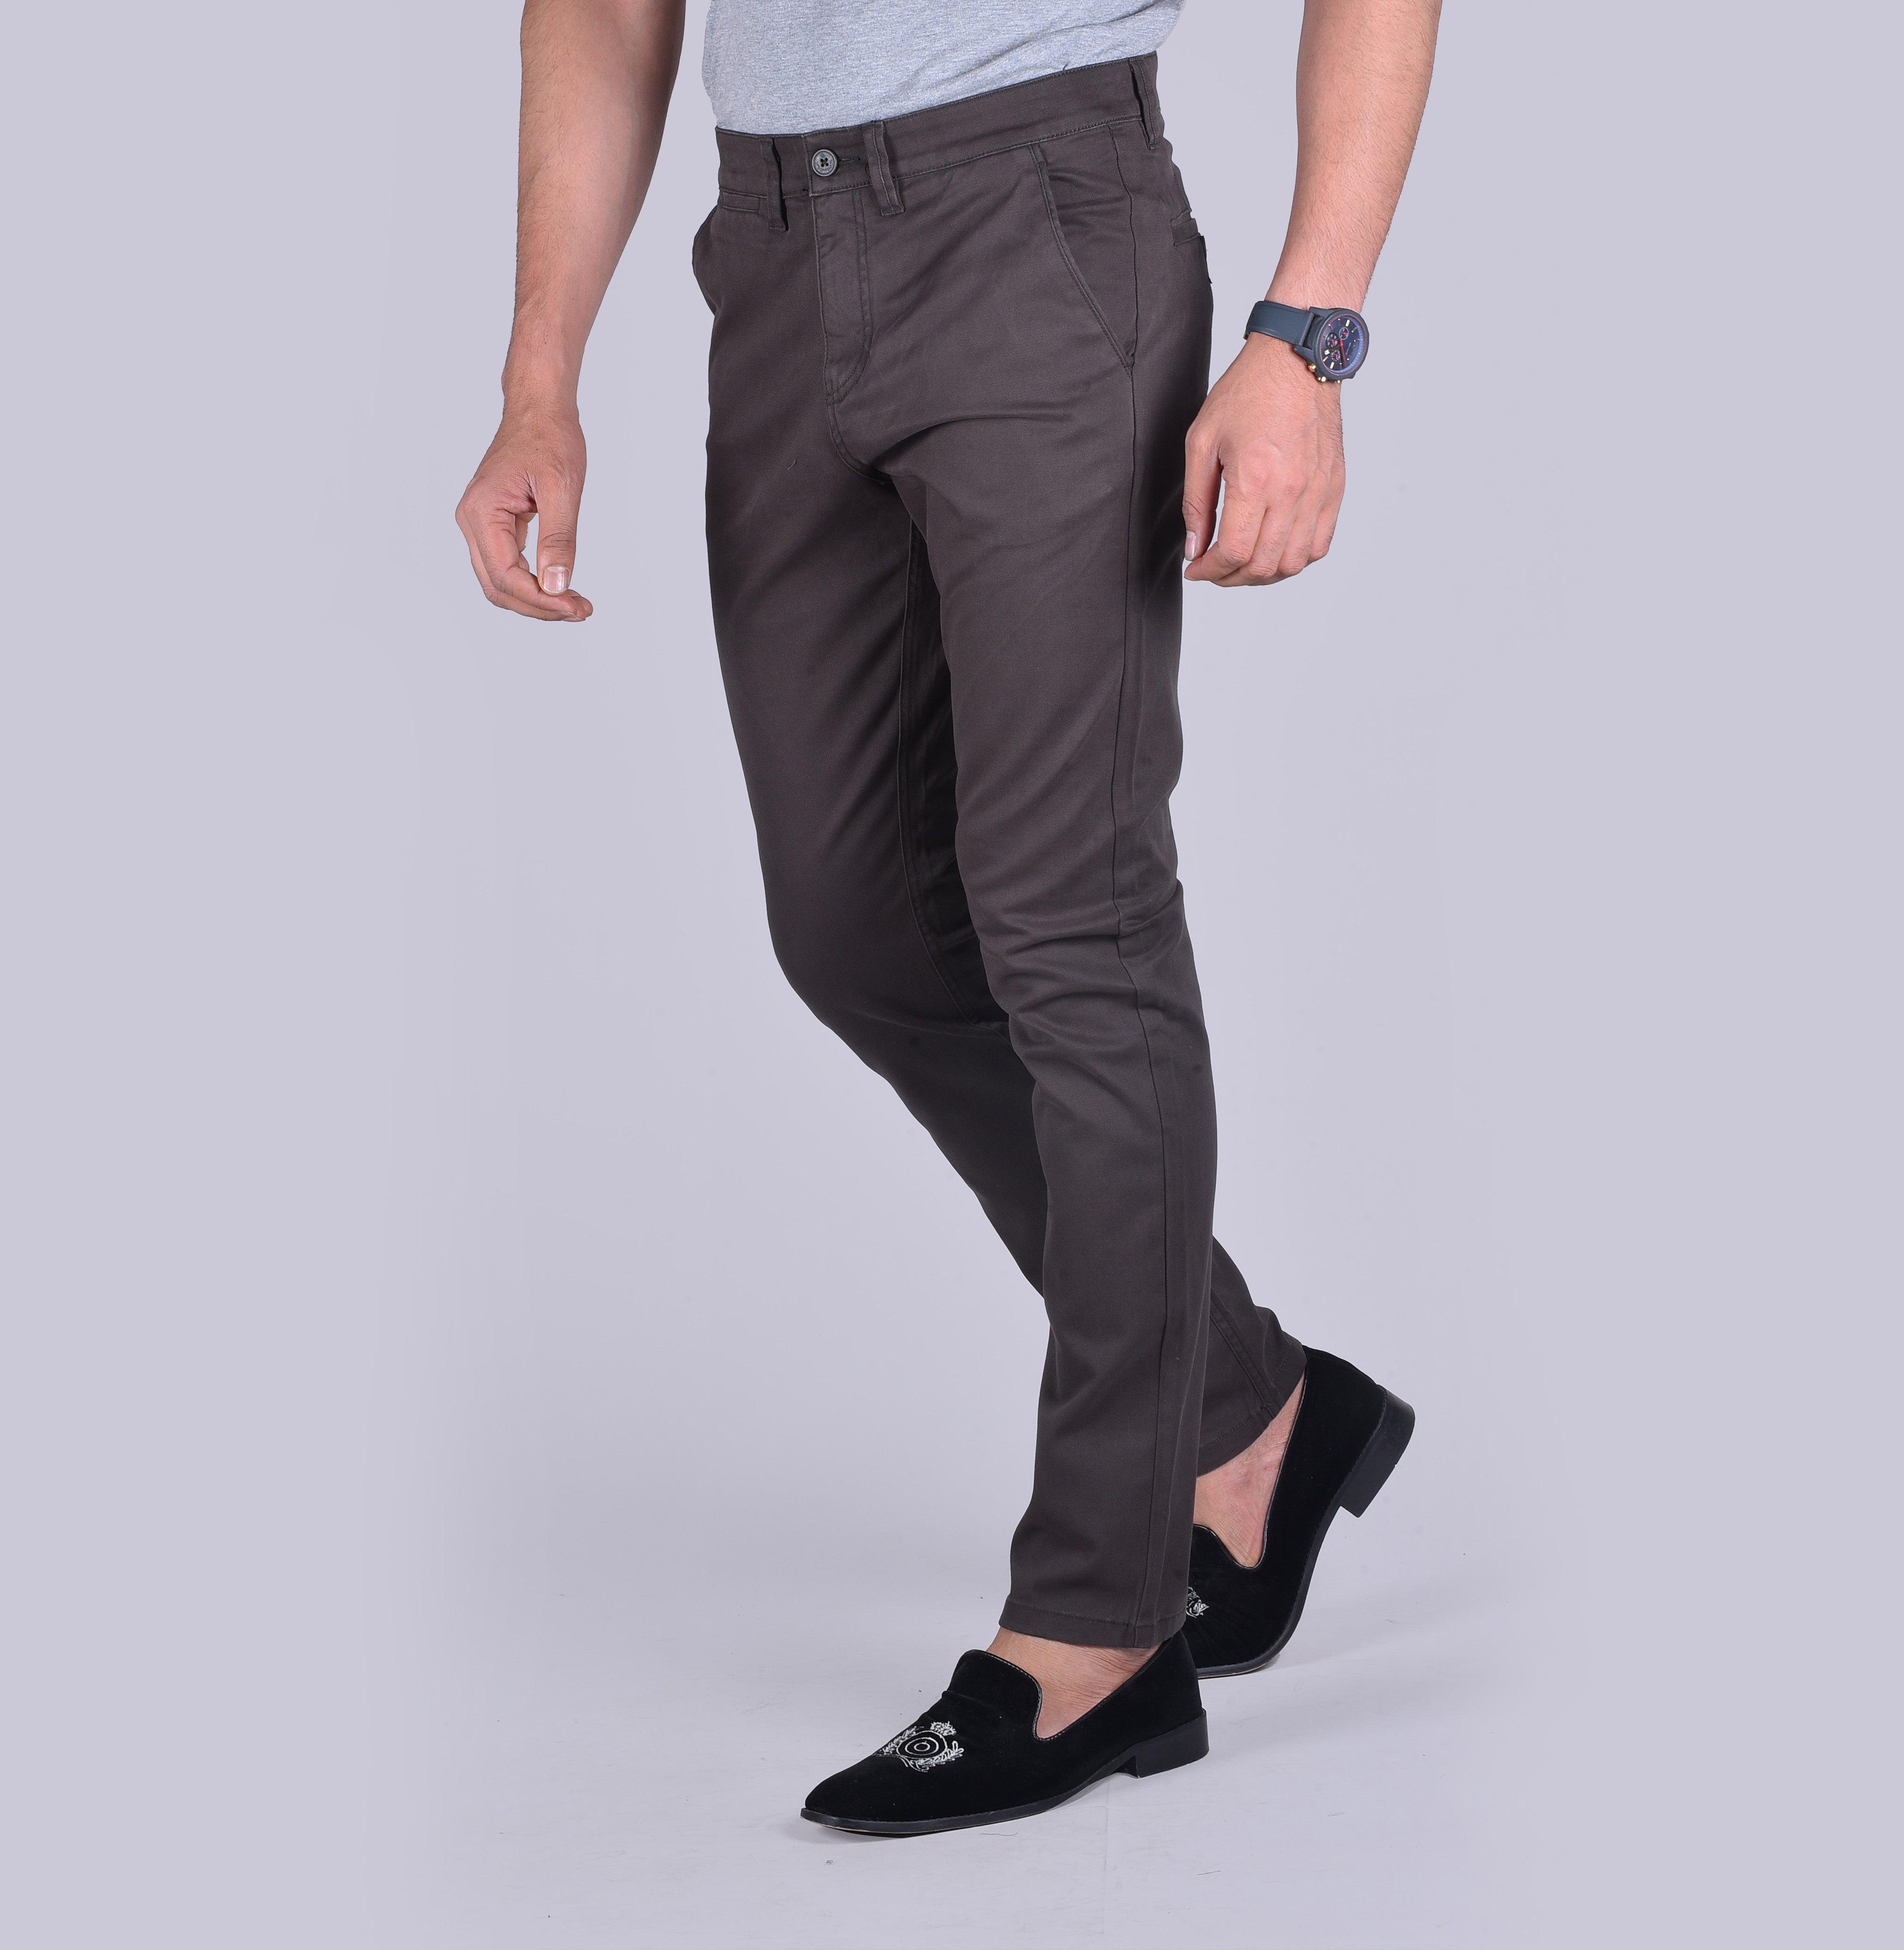 Polyester Lycra Multicolor Mens Casual Pants Flat Trousers